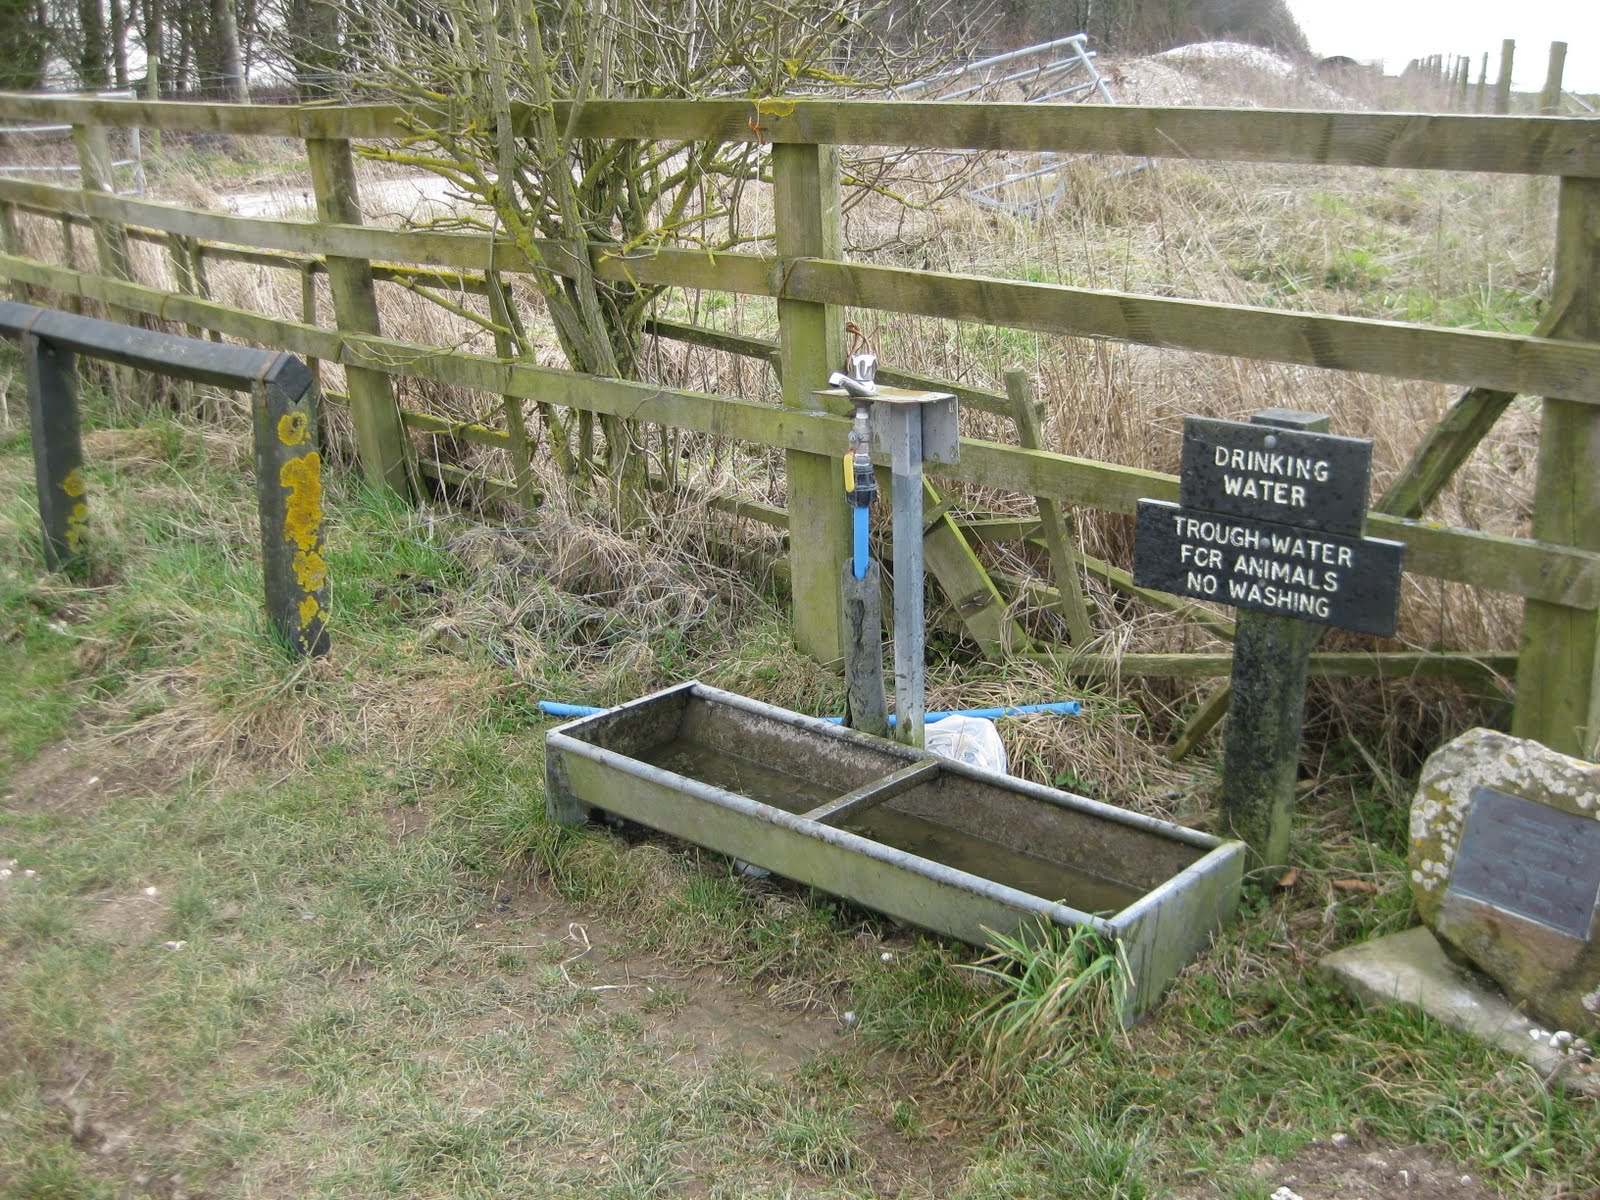 I like this place - drinking water provided along bridleways